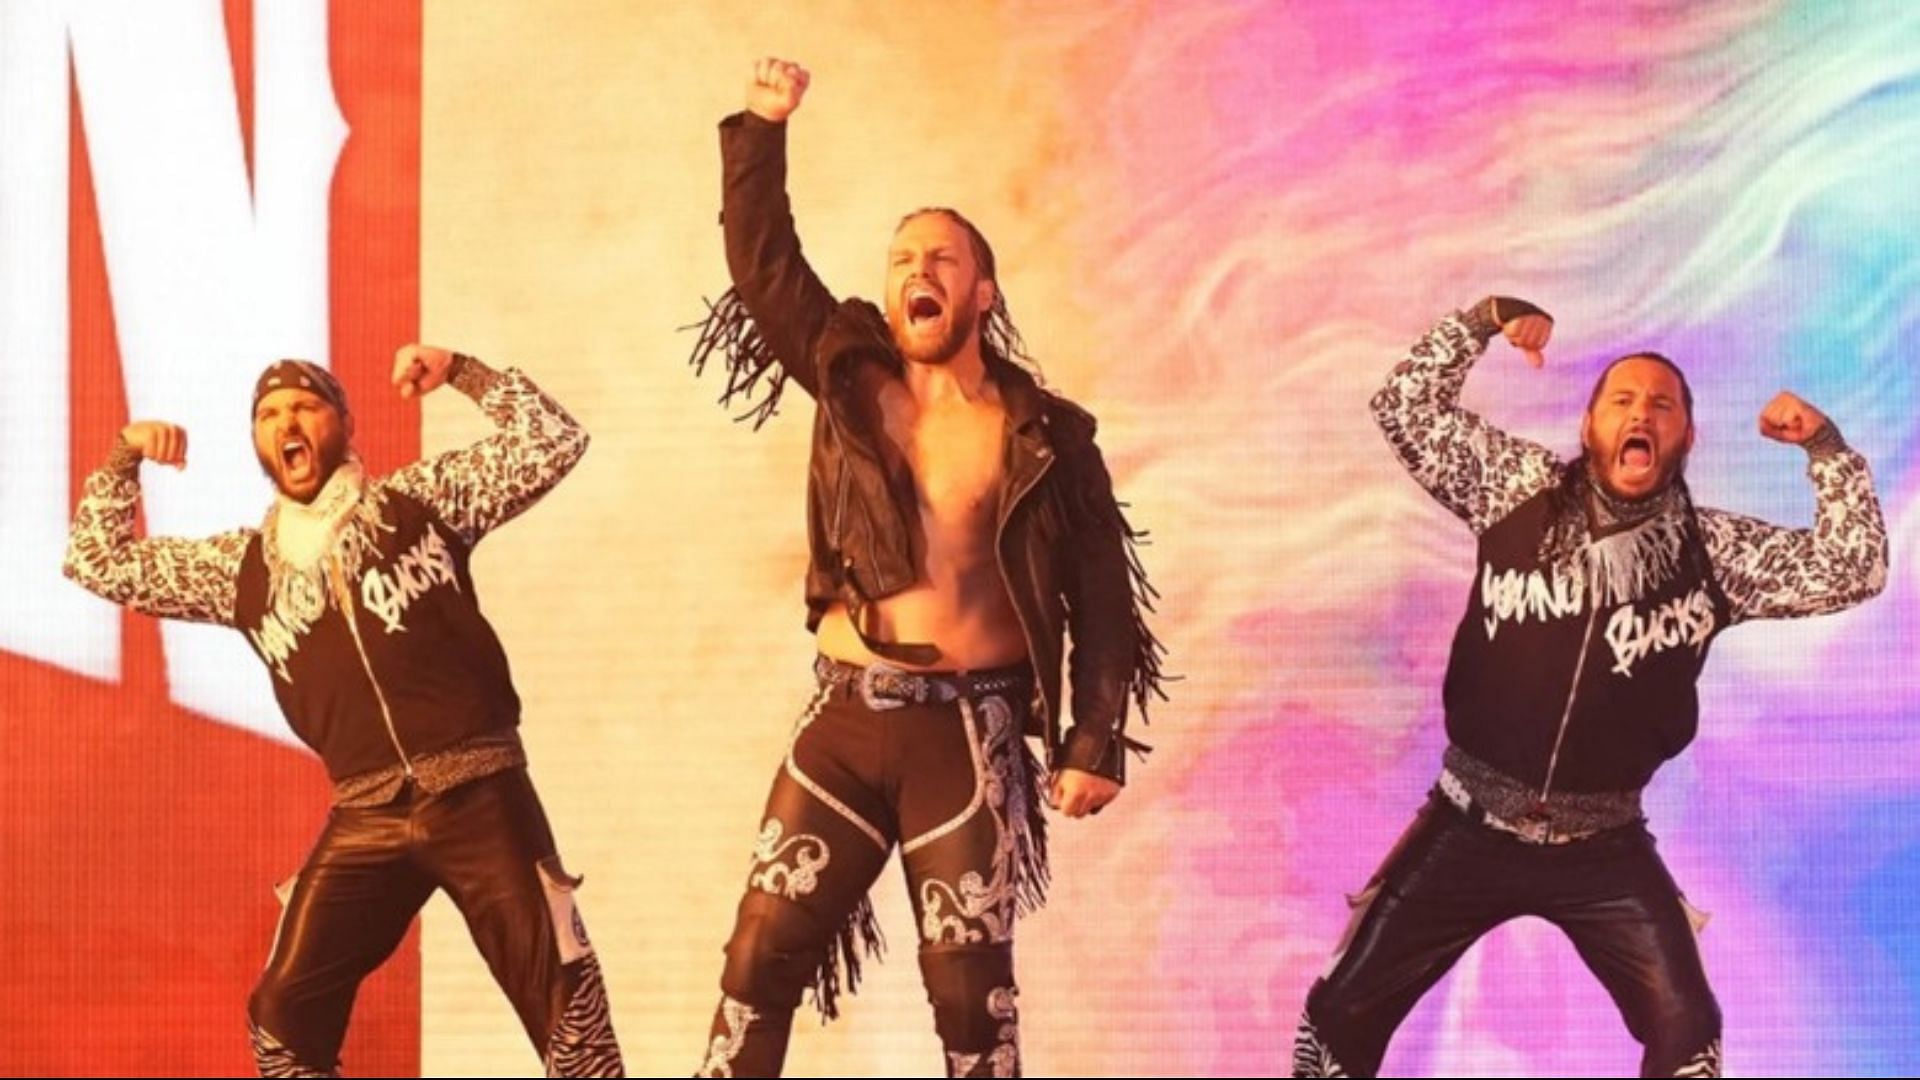 The Elite are one of the top trios in AEW